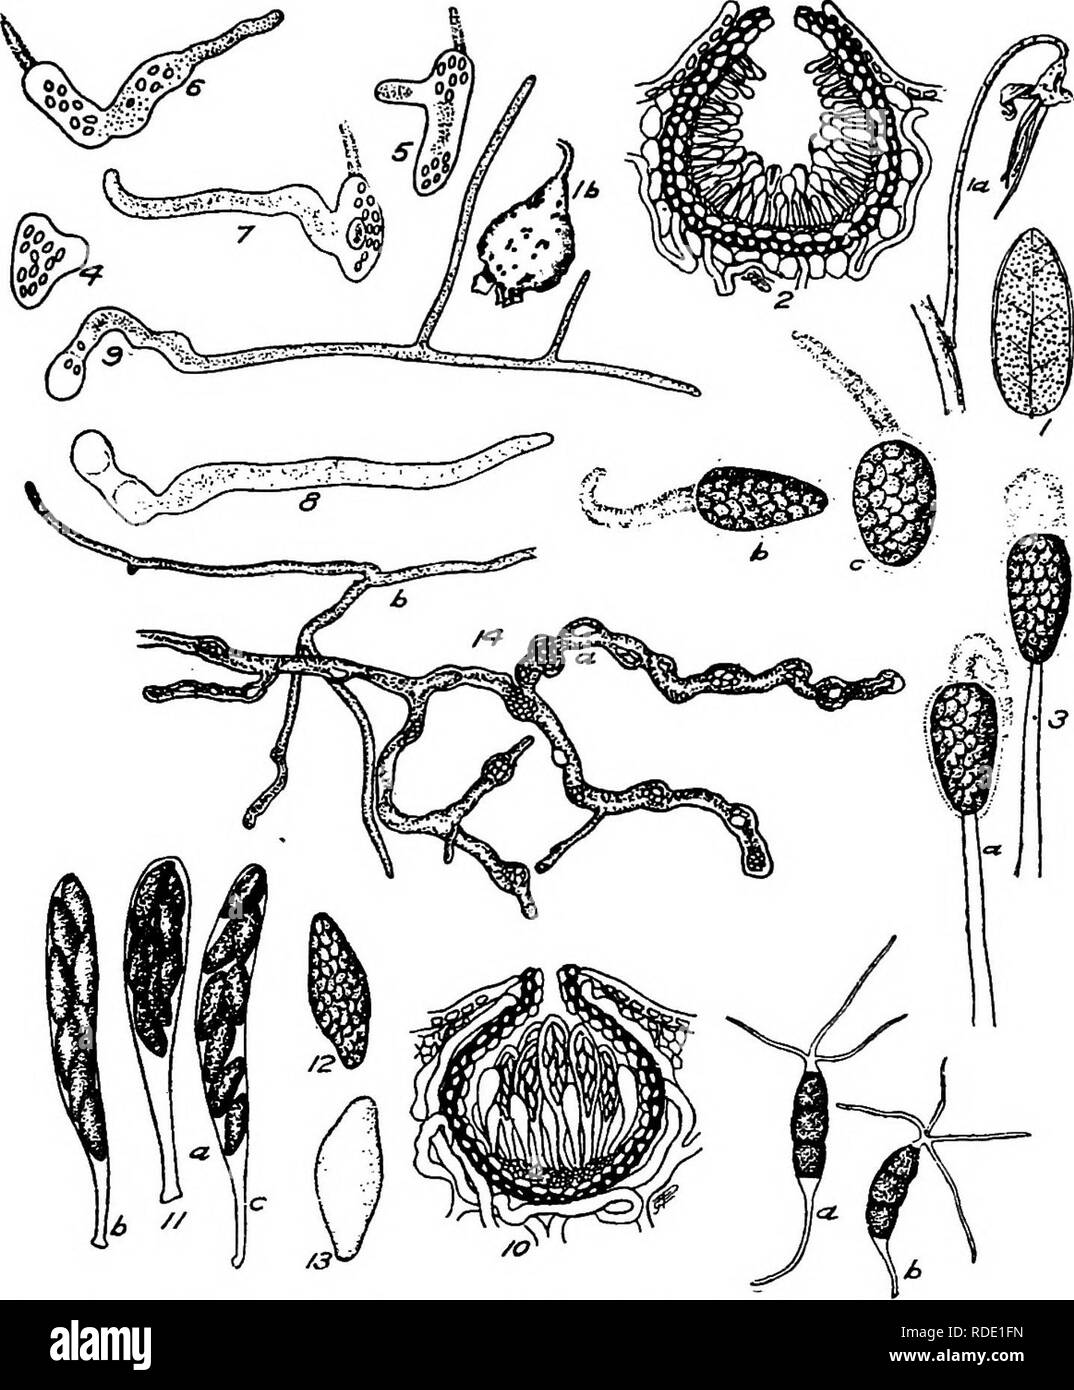 . A text-book of mycology and plant pathology . Plant diseases; Fungi in agriculture; Plant diseases; Fungi. DETAILED ACCOUNT OF SPECIFIC DISEASES OF PLANTS 5II. Fig. 183.—Details of cranberry scald fungus {Guignardia vaccinit). i, A cran- berry leaf, showing pycnidia of Guignardia vaccinii thickly scattered over the under surface; a, a cranberry blossom blasted by Guignardia vaccinii, showing pycnidia on calyx, corolla, and pedicel; 6, a blasted fruit, showing pycnidia. a, A vertical section of a single pycnidium of Guignardia vaccinii from a cranberry leaf, showing pycno- spores in various s Stock Photo